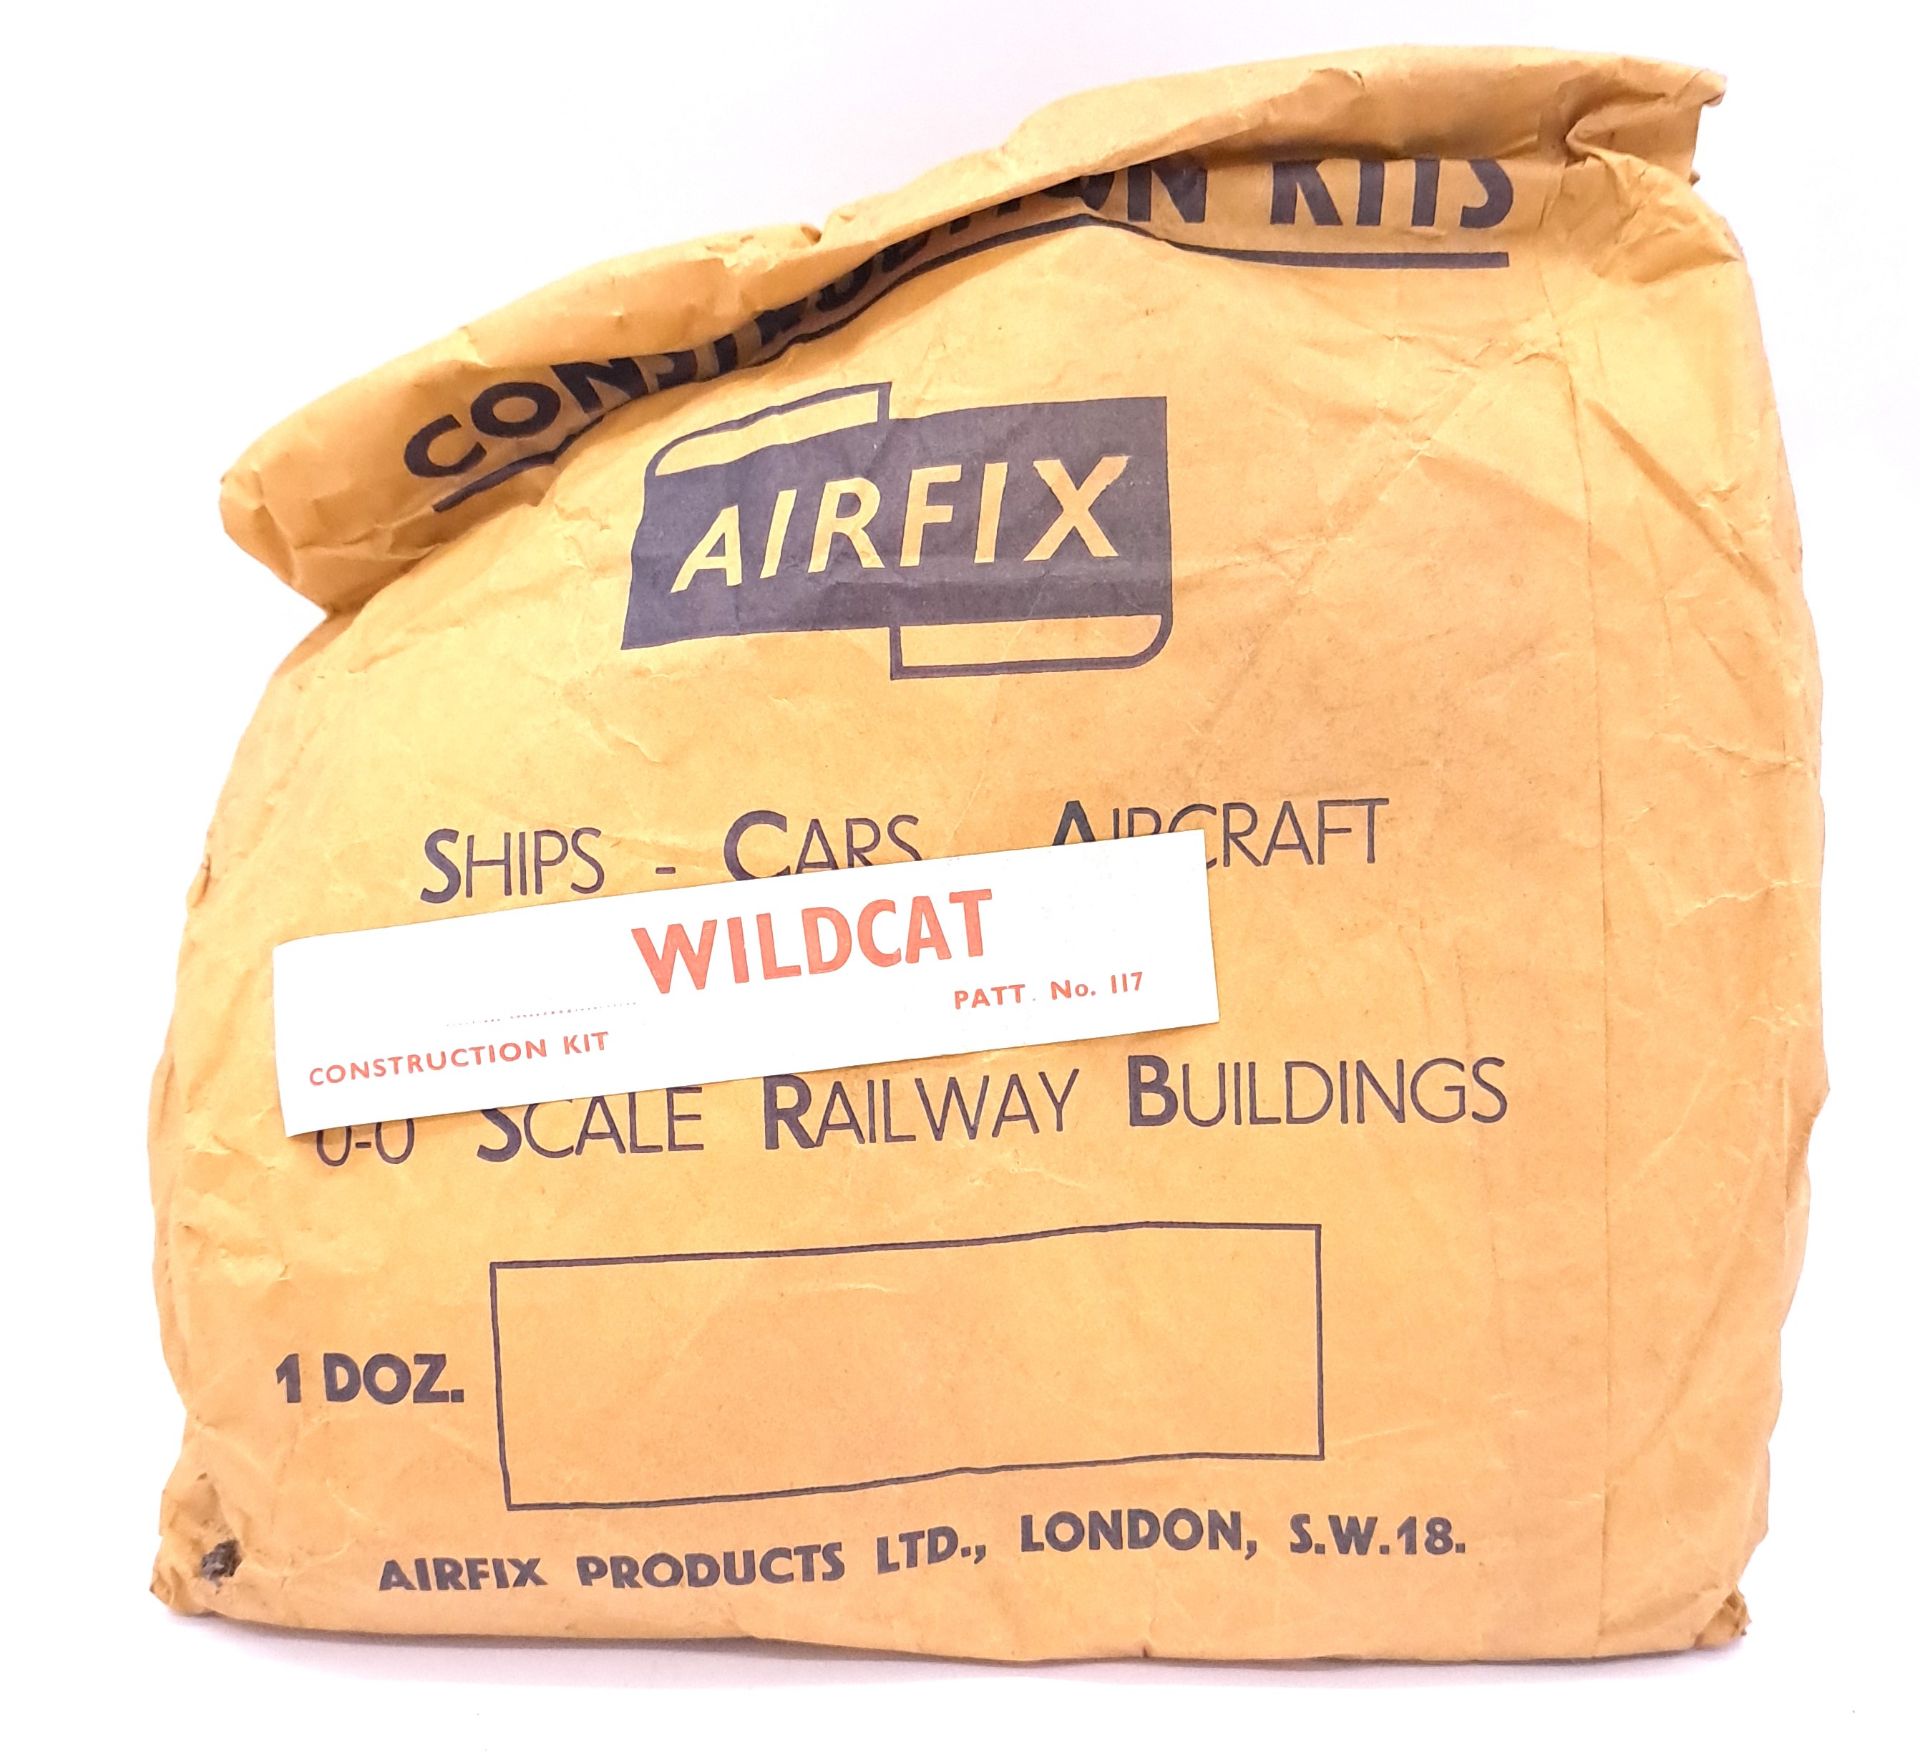 Airfix c1960’s ORIGINAL TRADE BAG complete with Bagged (possibly Type3) “Wildcat” Kits